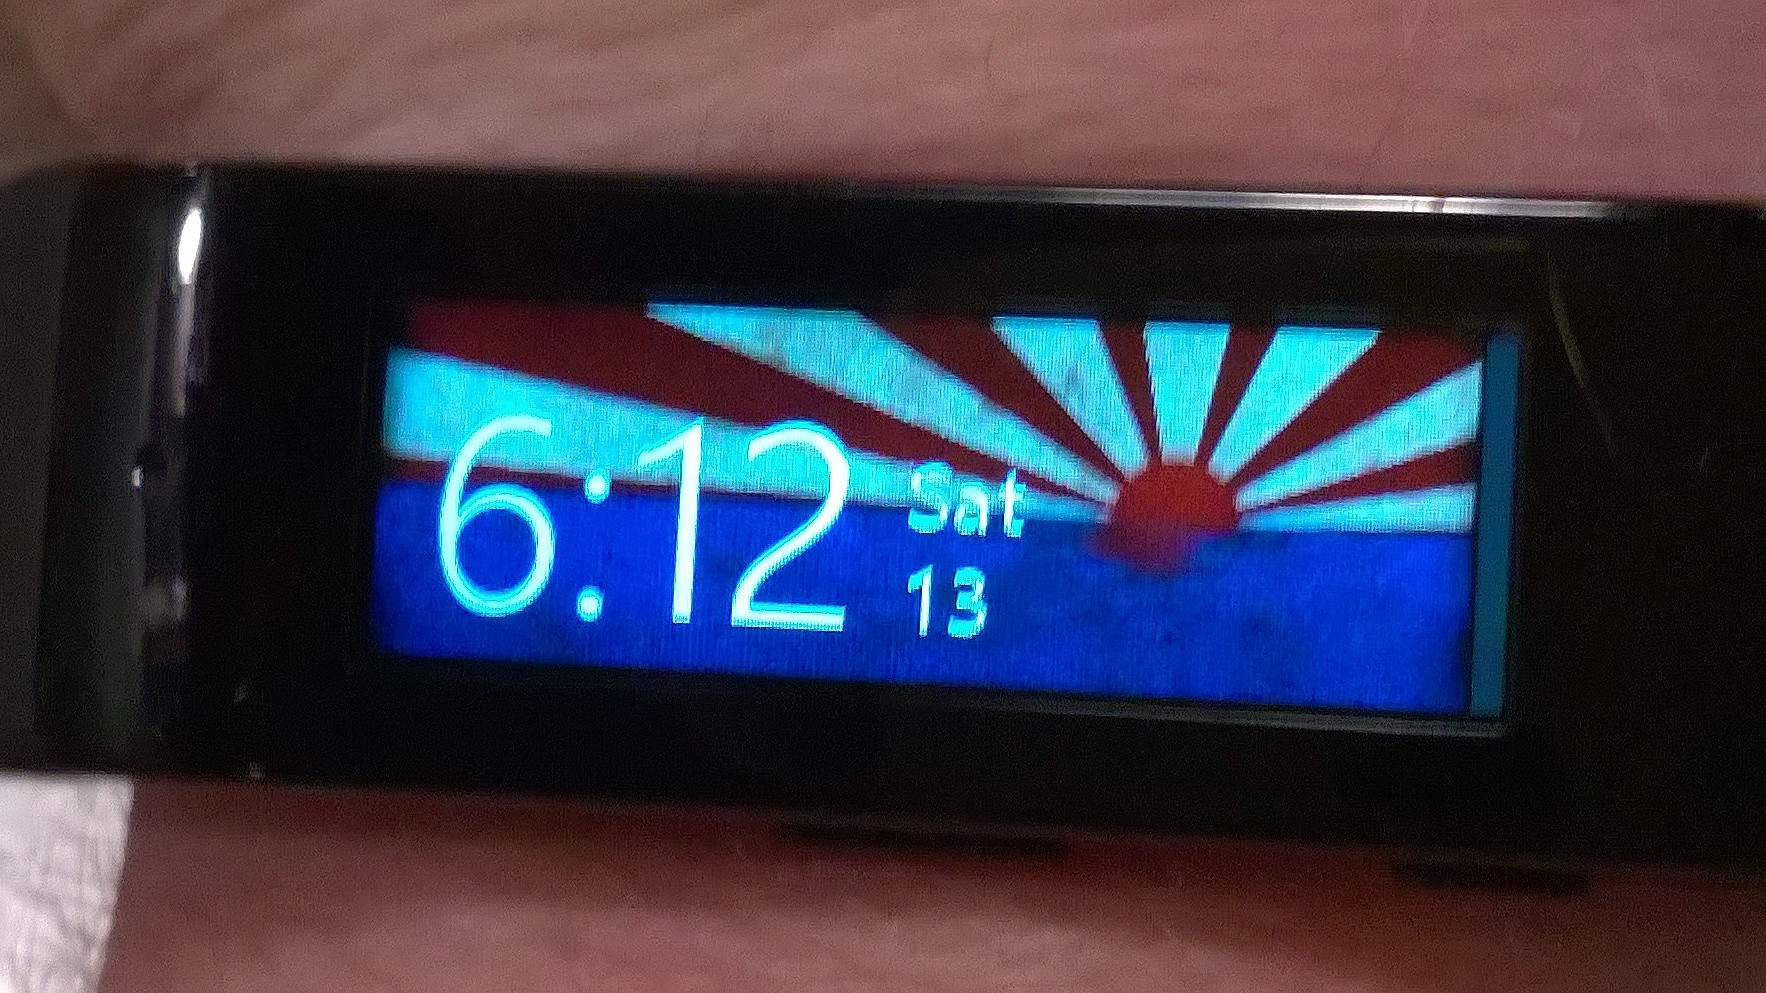 Change your Microsoft Band wallpaper with Pimp my Band for Windows